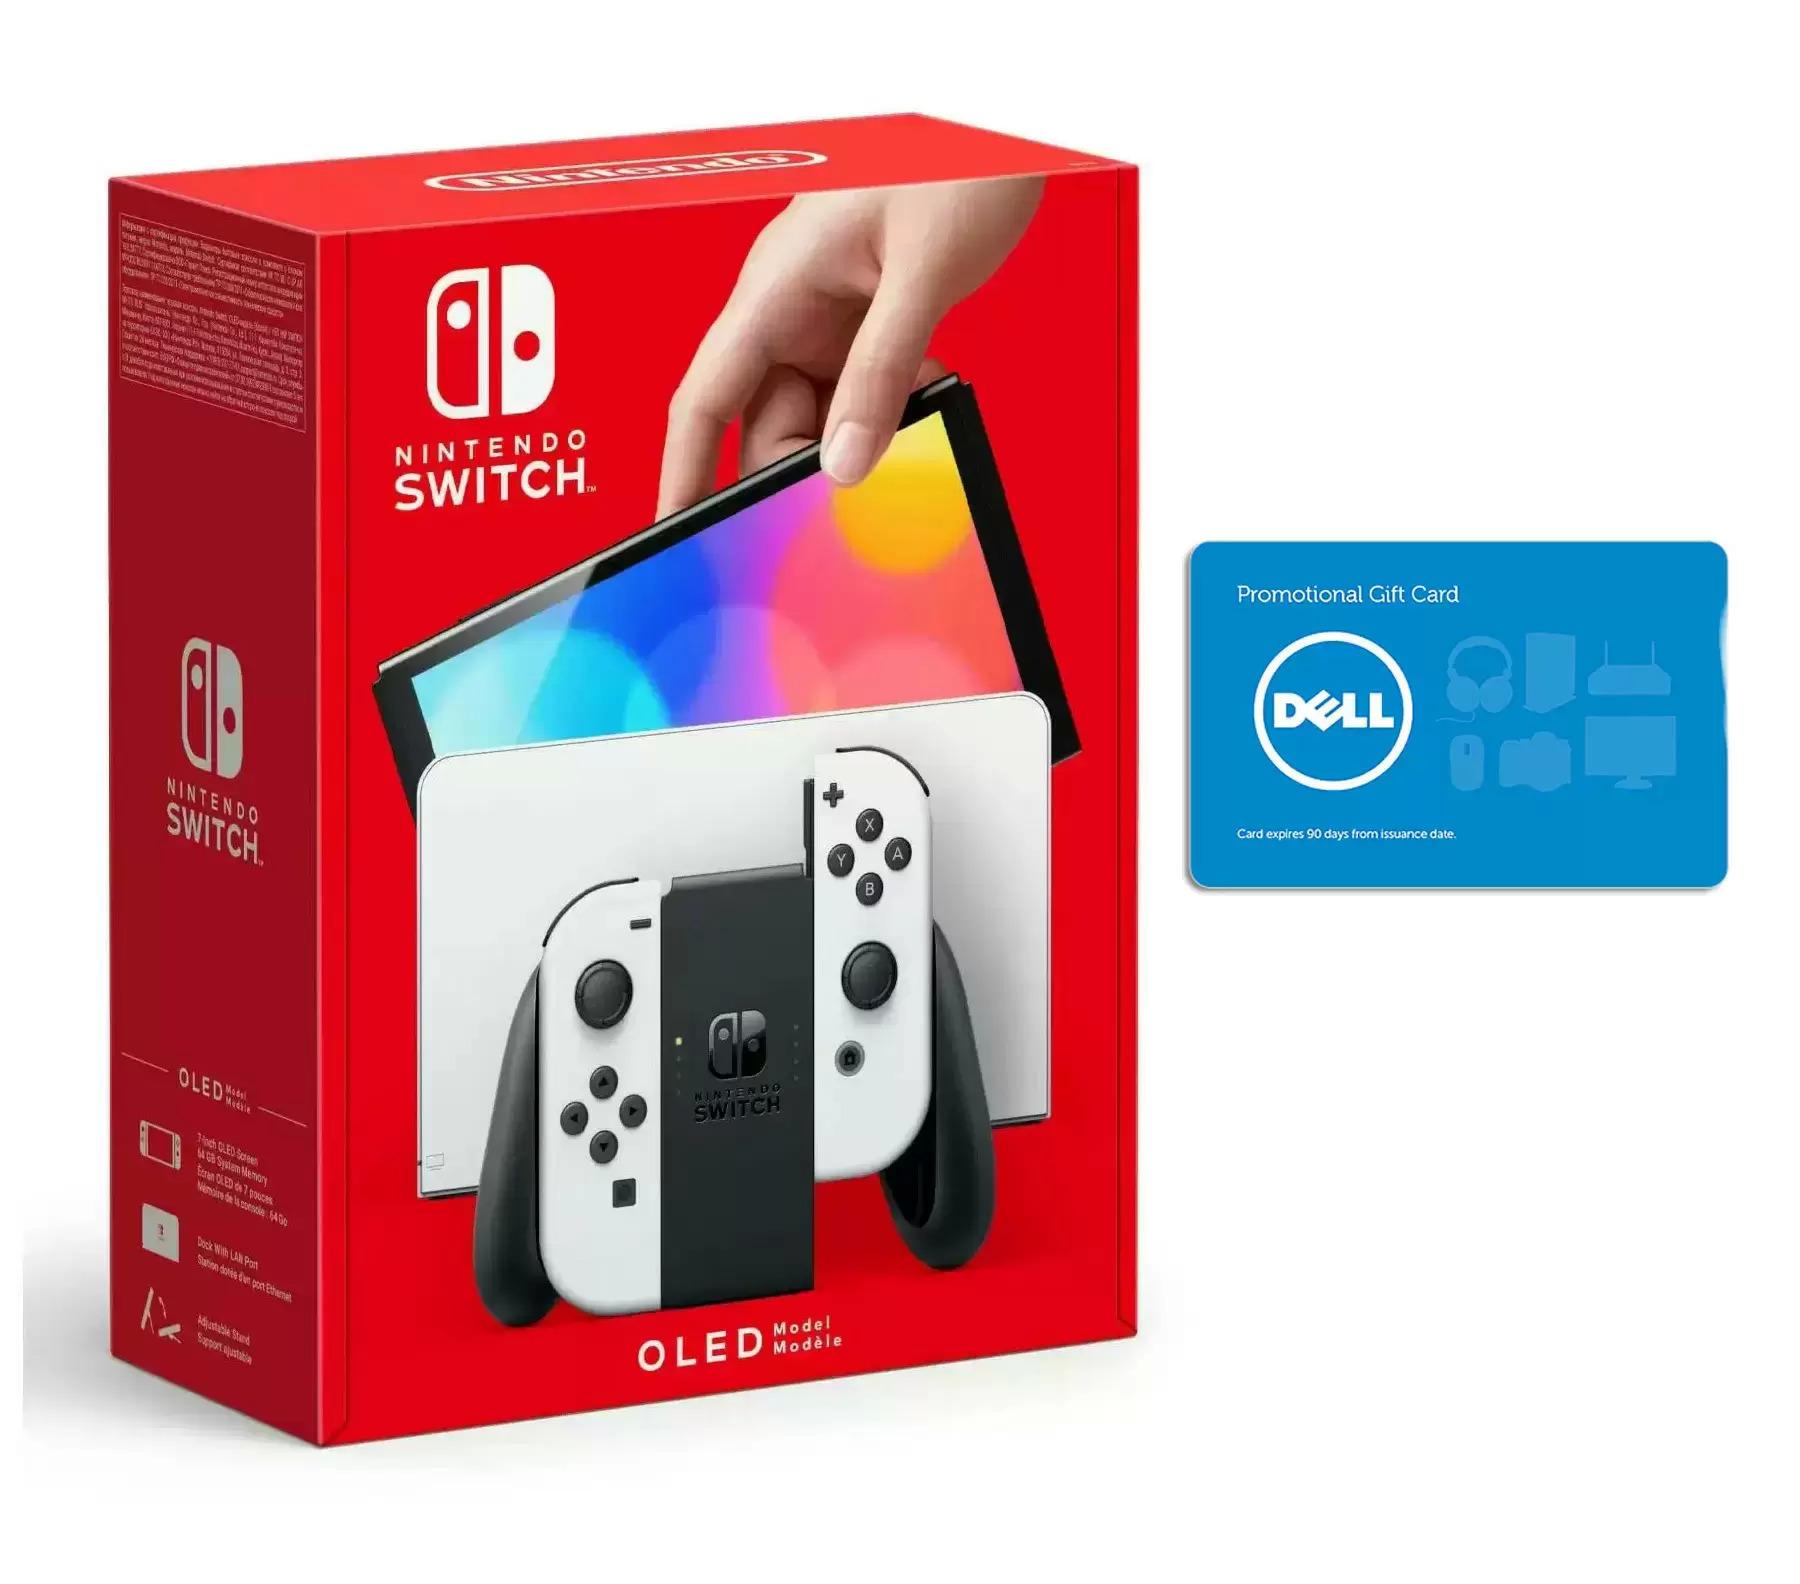 Nintendo Switch OLED with a $75 Dell Gift Card for $349.99 Shipped